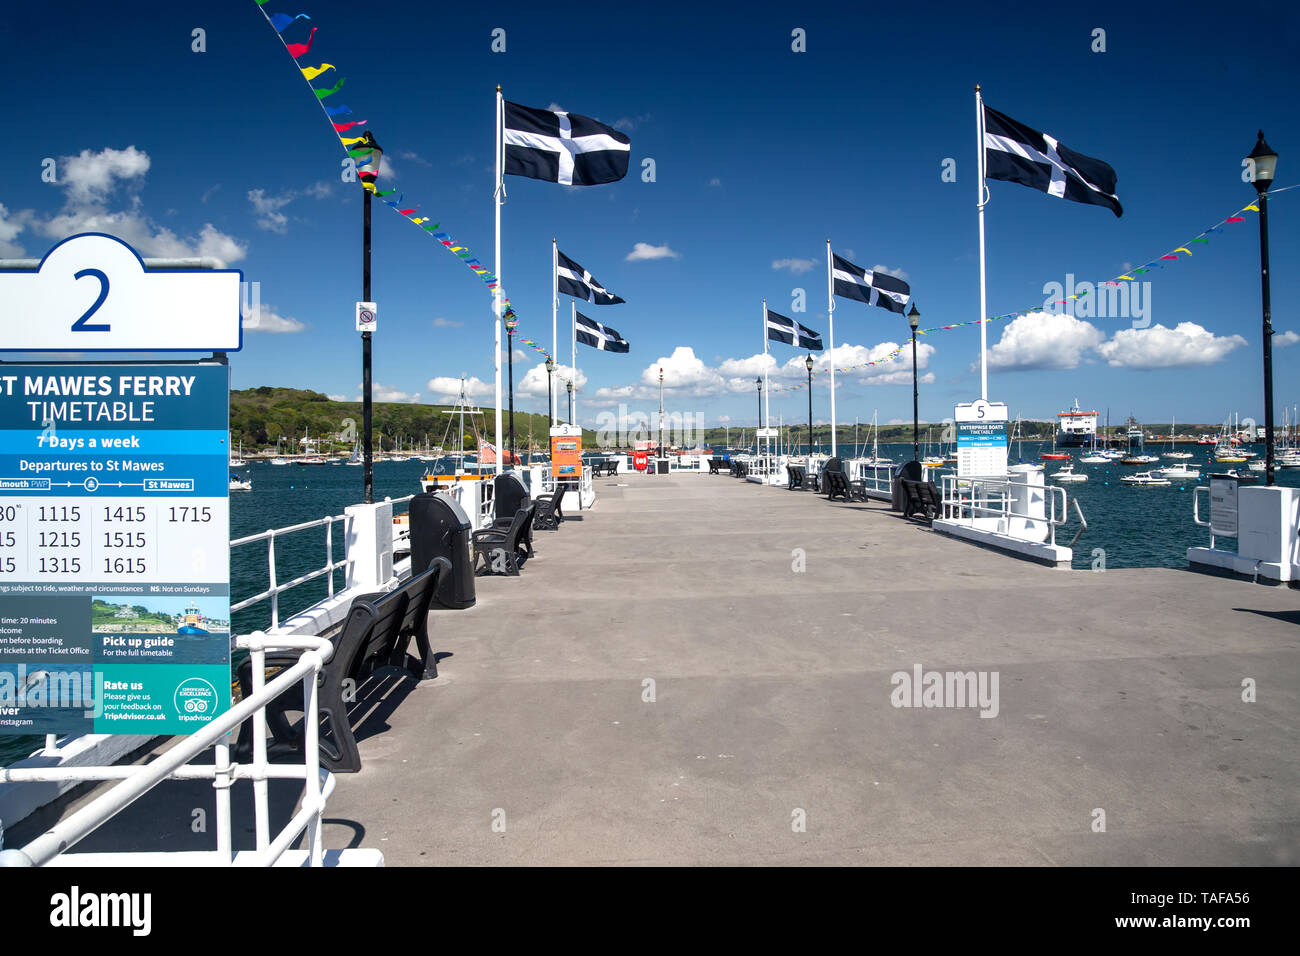 View of the Prince of Wales pier in Falmouth, Cornwall serving as a boat launch for ferries across the bay and up the River Fal. Stock Photo